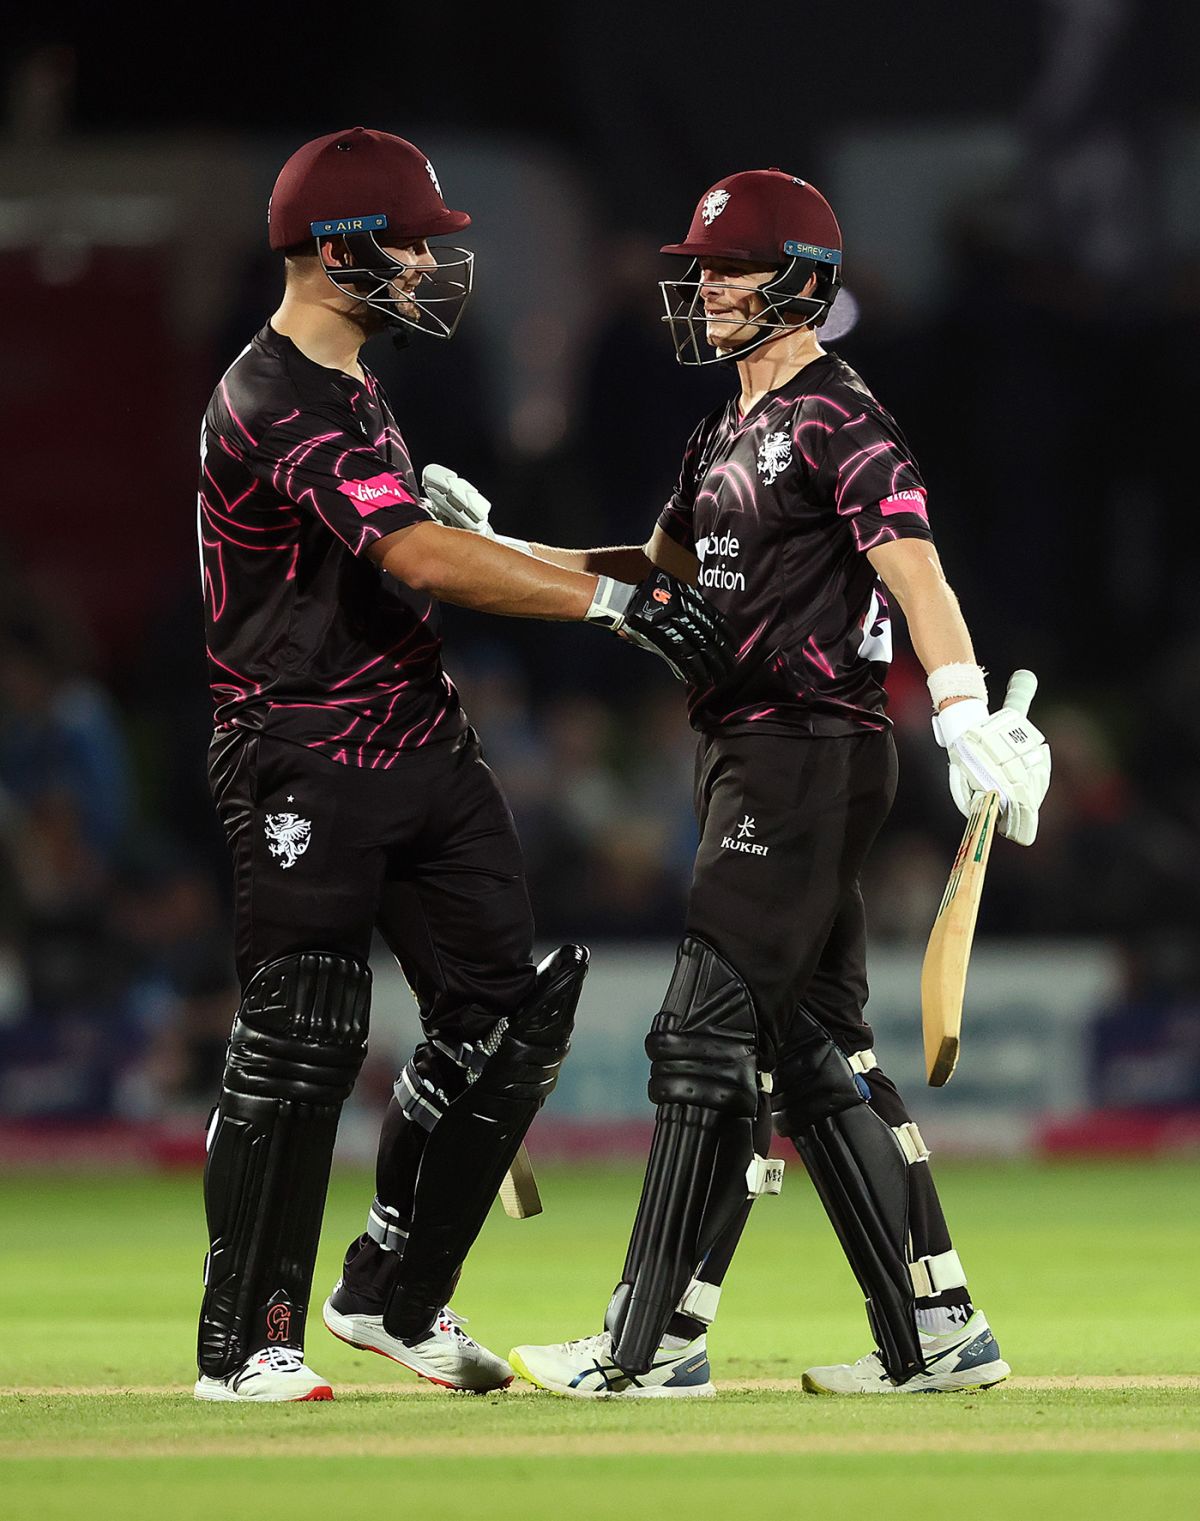 Rilee Rossouw and Tom Abell took Somerset across the line, Kent vs Somerset, Vitality T20 Blast South Group, Canterbury, May 25, 2022